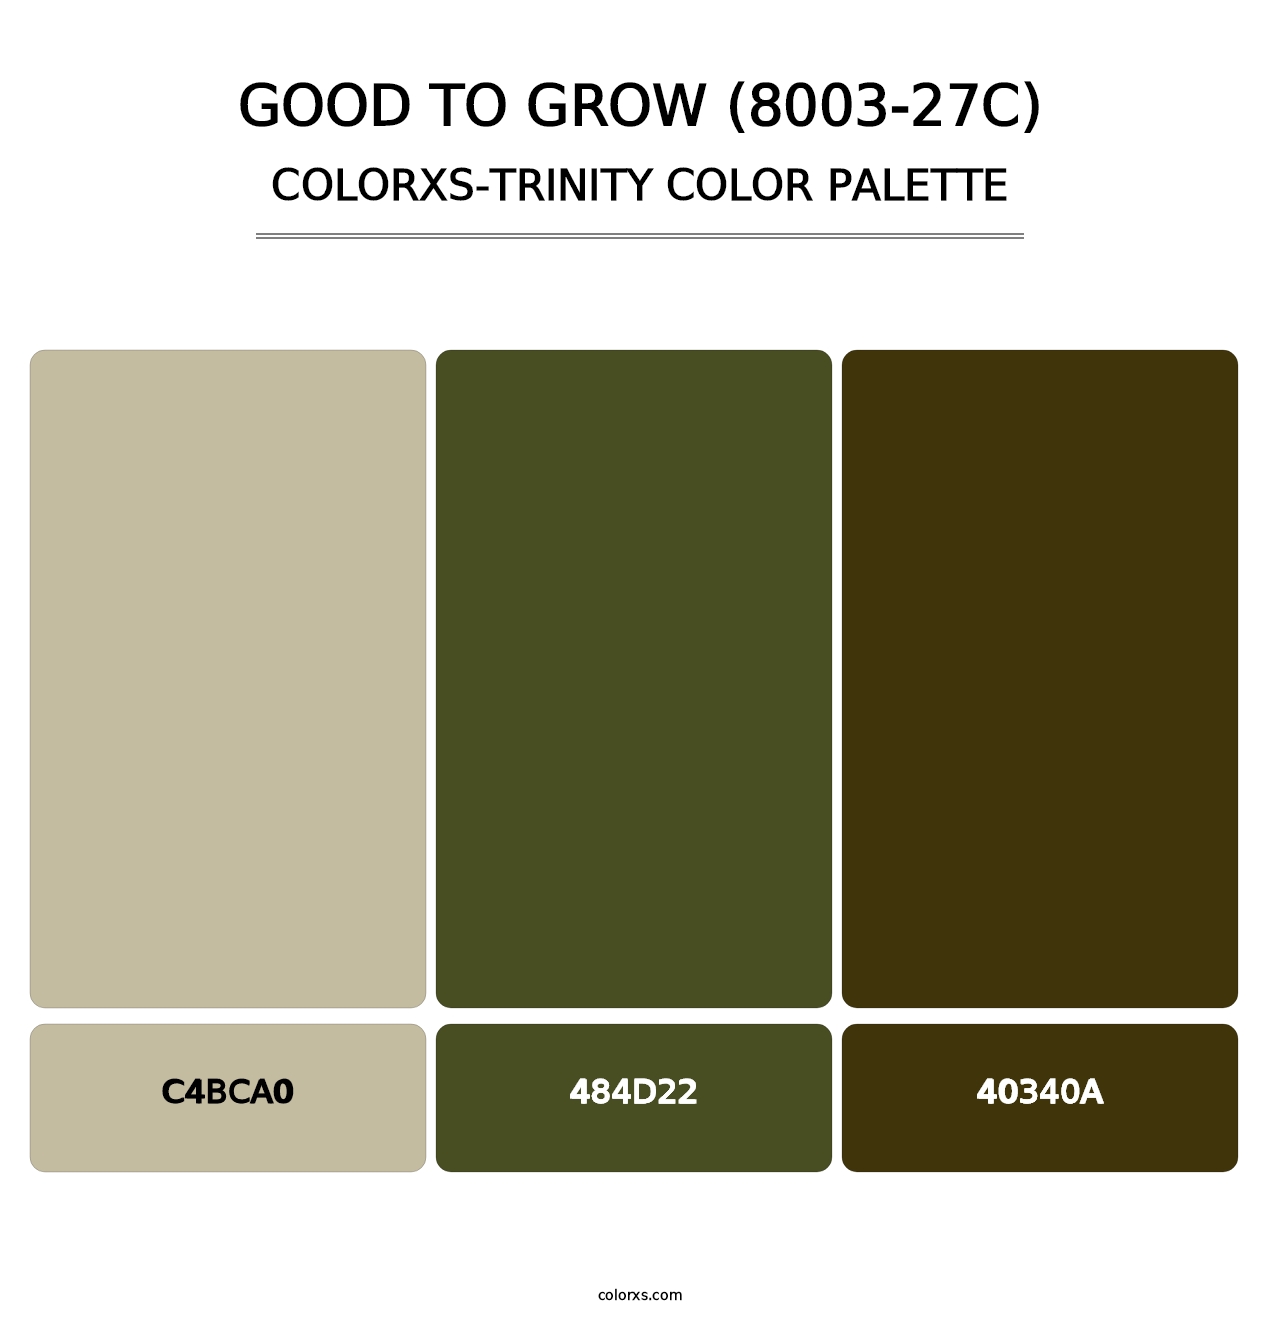 Good to Grow (8003-27C) - Colorxs Trinity Palette